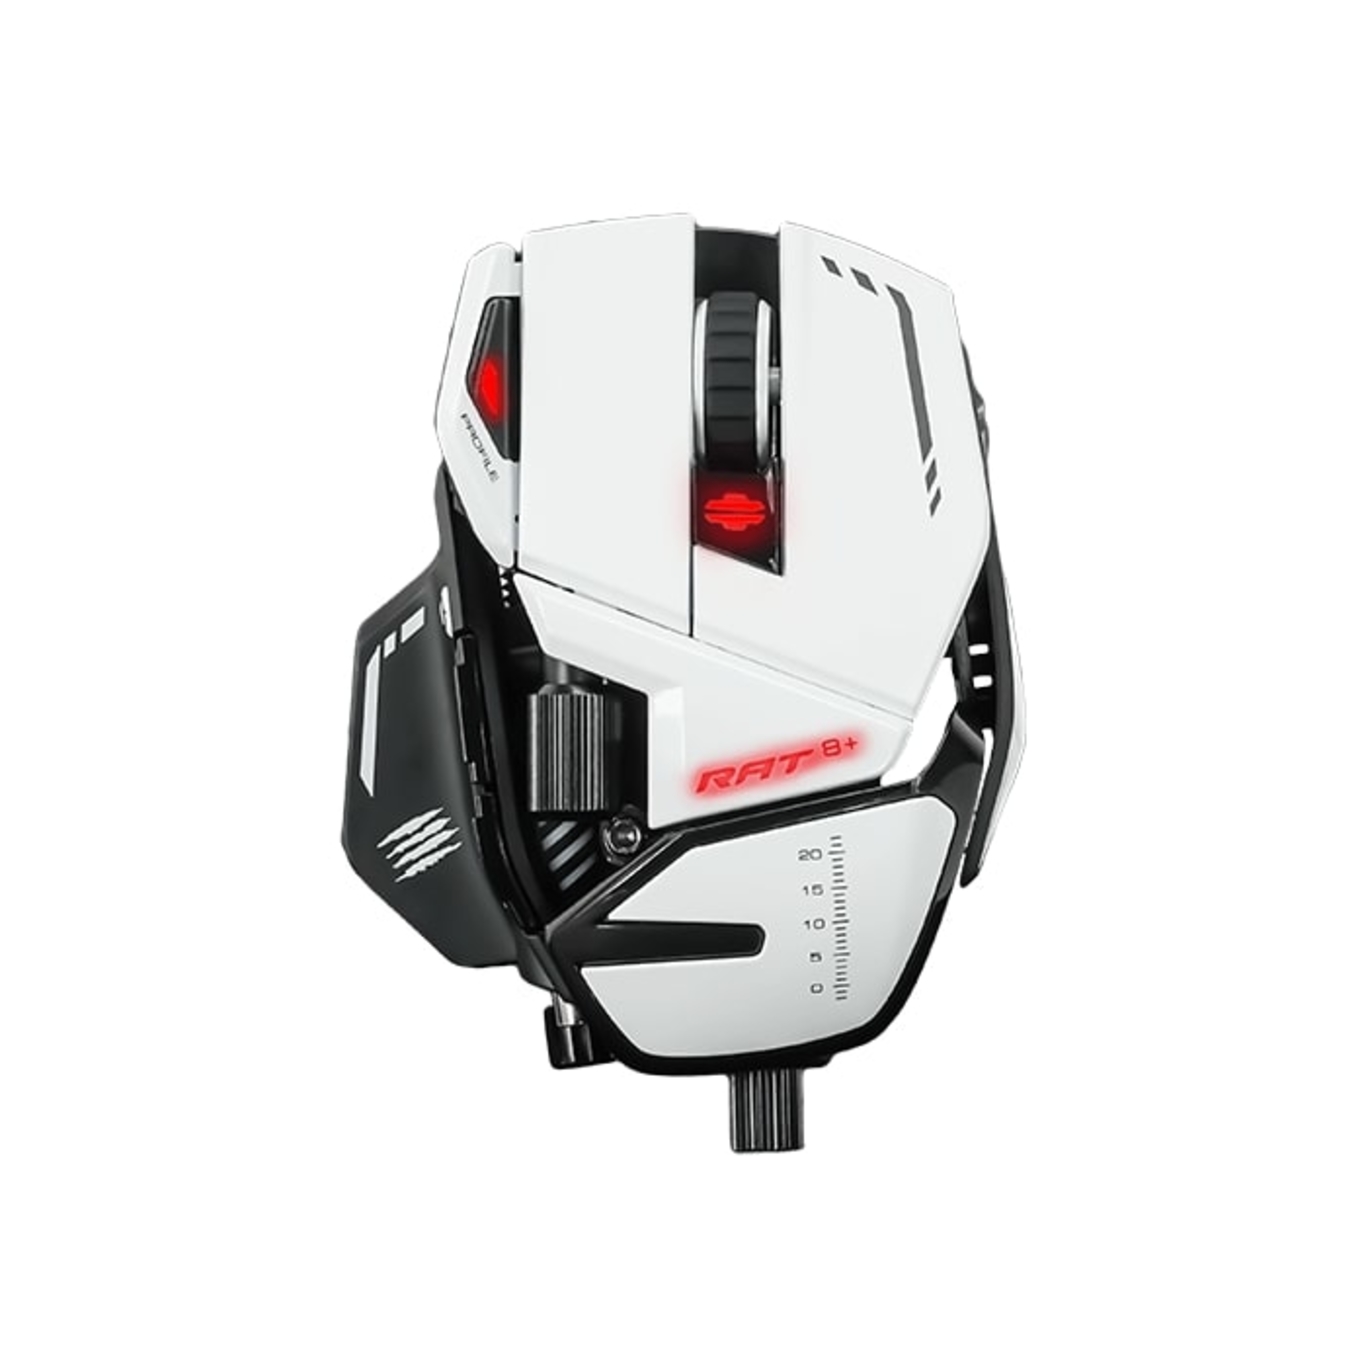 Madcatz. Mad Catz r.a.t. 8+. Мышь Mad Catz r.a.t. 8. Игровая мышь Mad Catz r.a.t. 8+. Мышка Mad Catz r.a.t. 6.